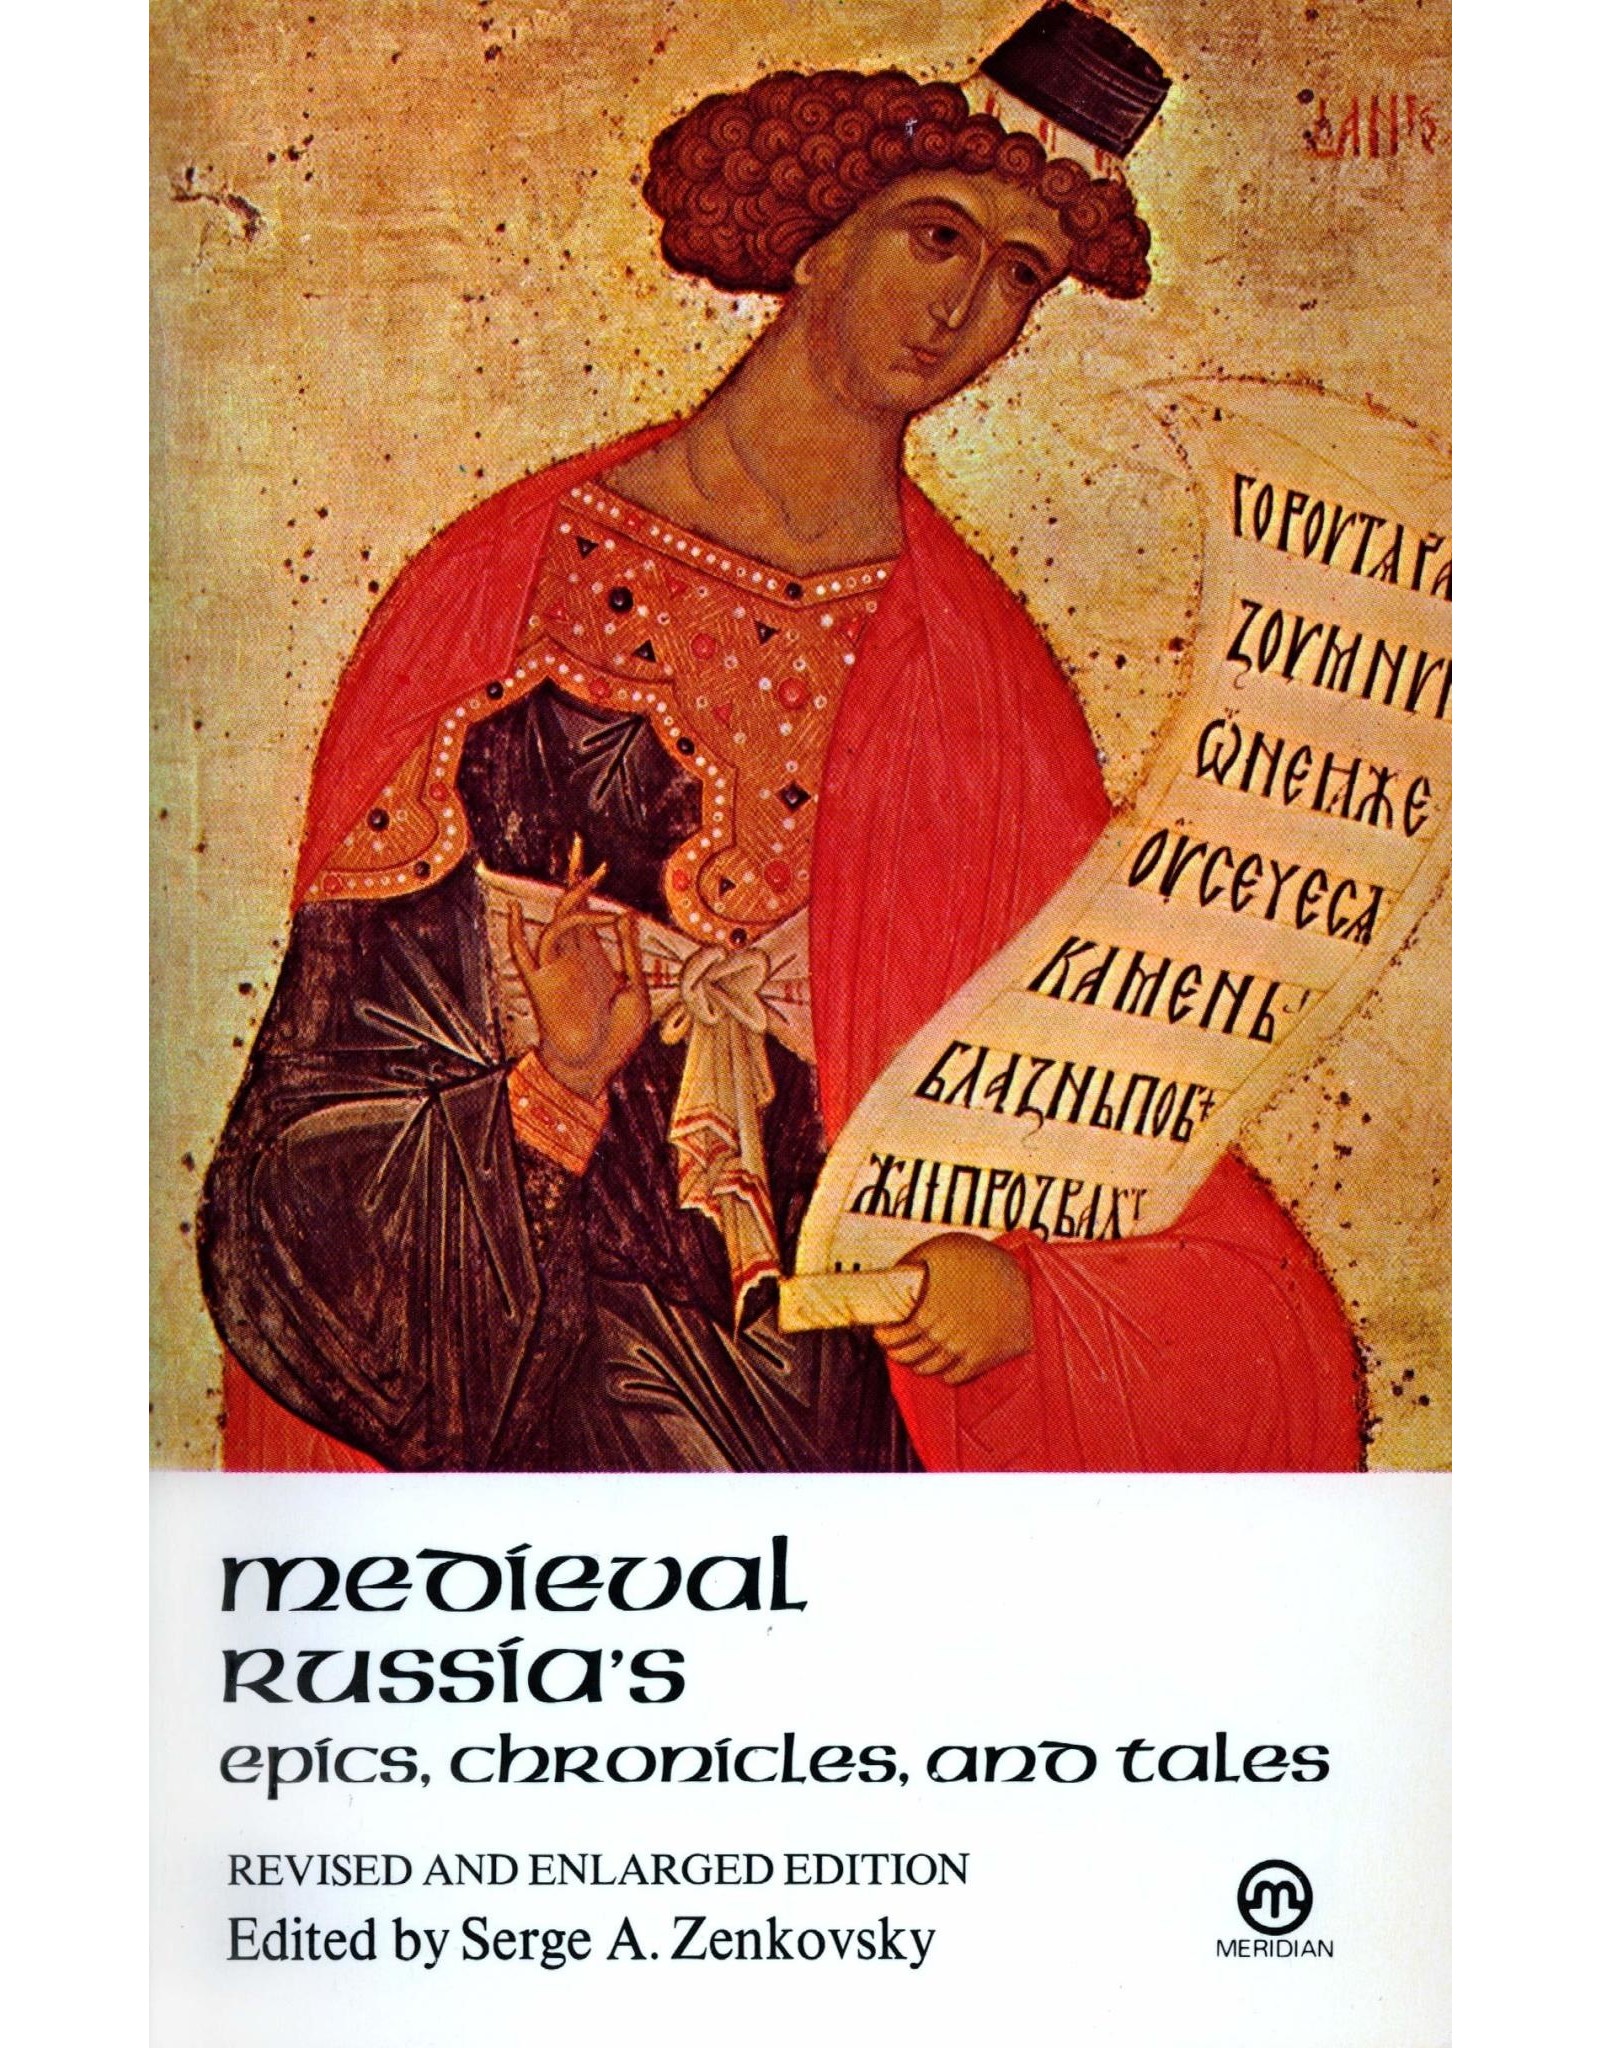 Medieval Russia's Epics, Chronicles, and Tales